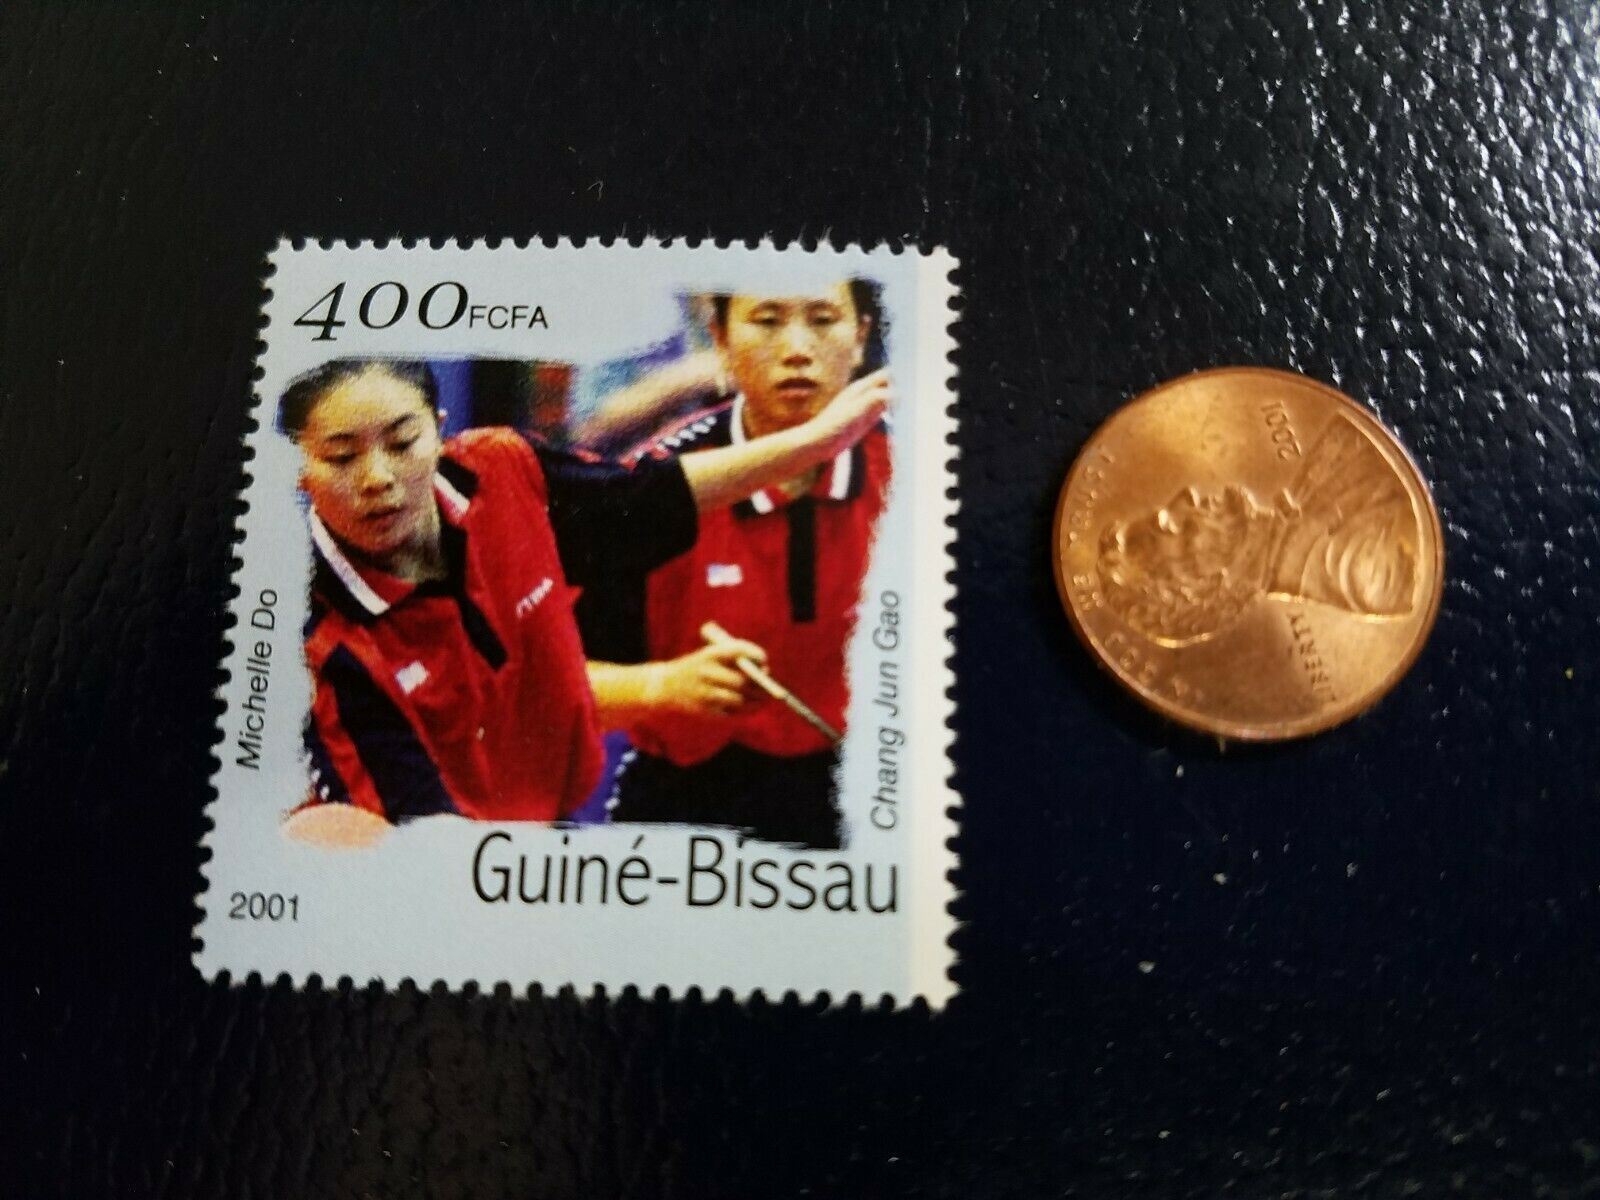 Michelle Do Chang Jun Gao Table Tennis Ping Pong Olympic Guine-bissau 2001 Stamp